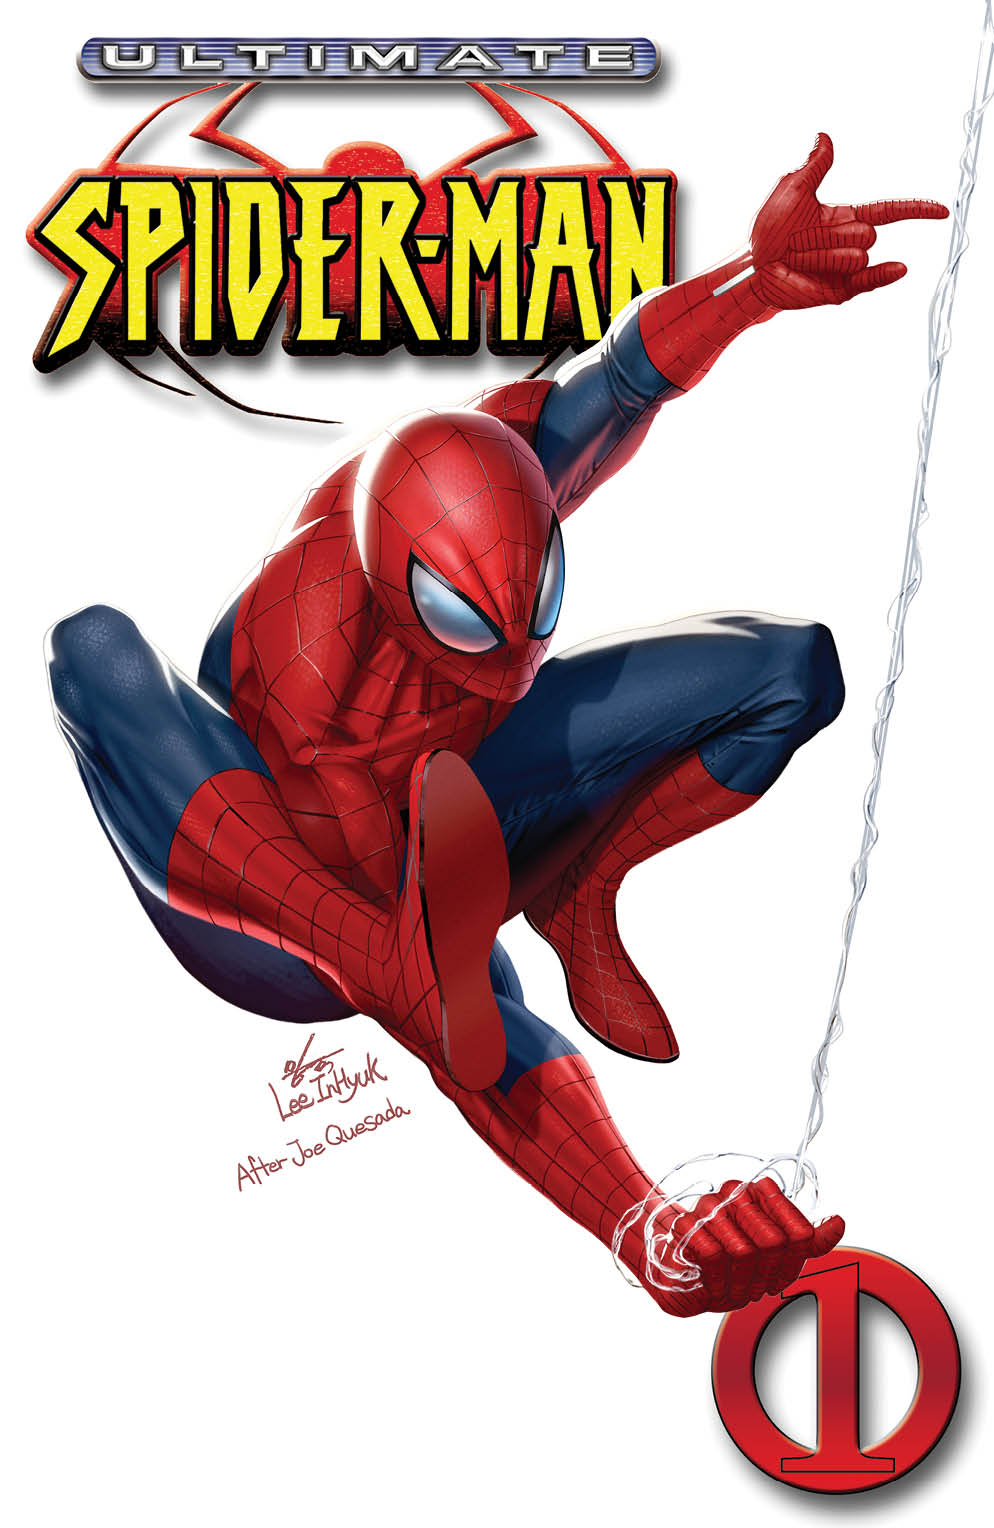 ULTIMATE SPIDER-MAN #1 INHYUK LEE PHILIDELPHIA FAN EXPO CLASSIC TRADE VARIANT LIMITED TO 800 COPIES WITH NUMBERED COA